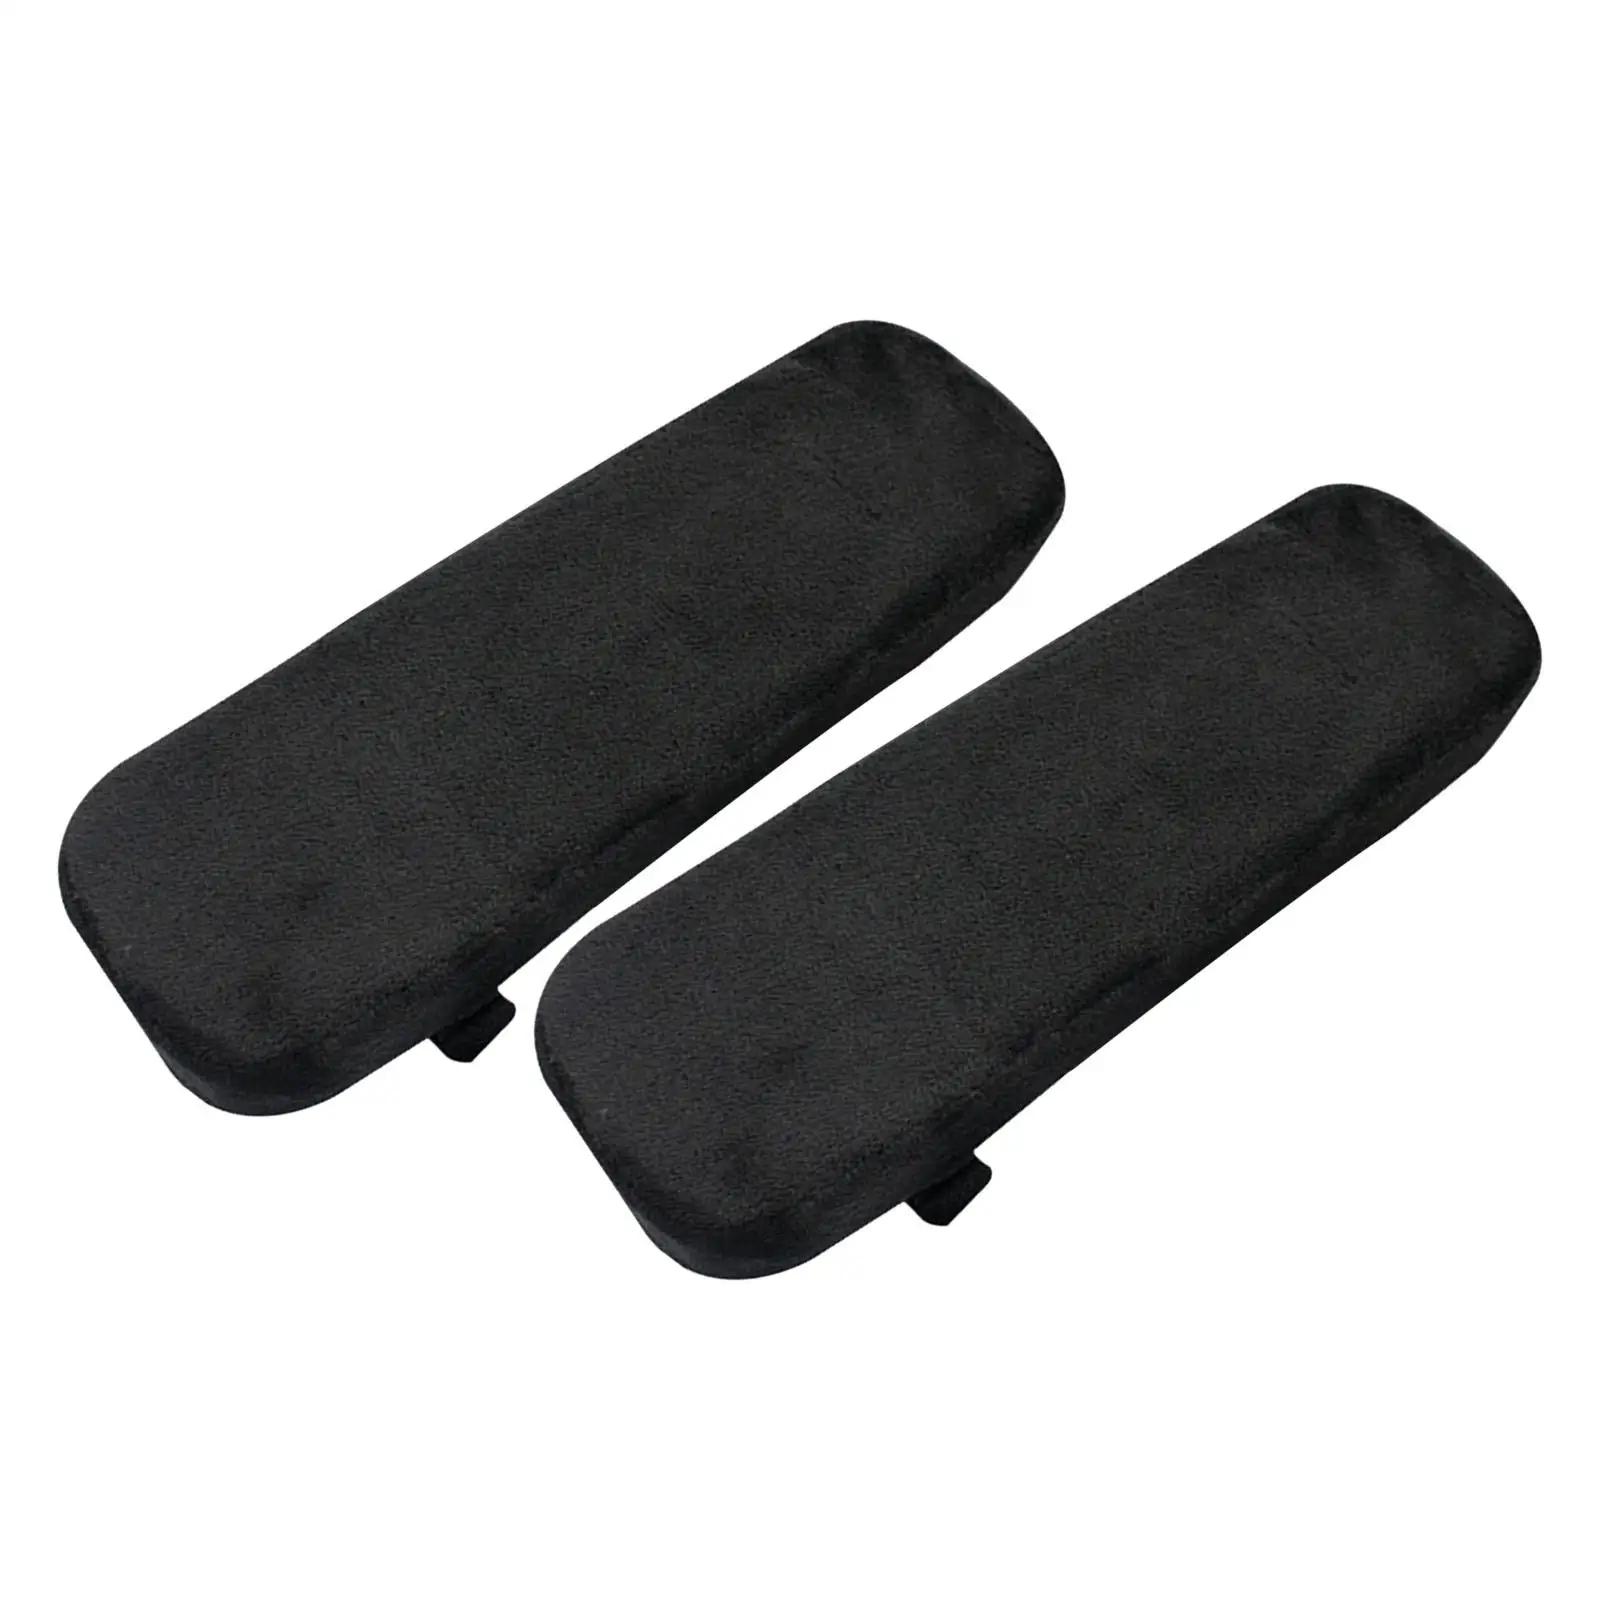 2 Pack Chair Armrest Pad Armrests Armrest Covers Washable Removable Comfort Universal Soft Arm Rest Cover for Office Chair